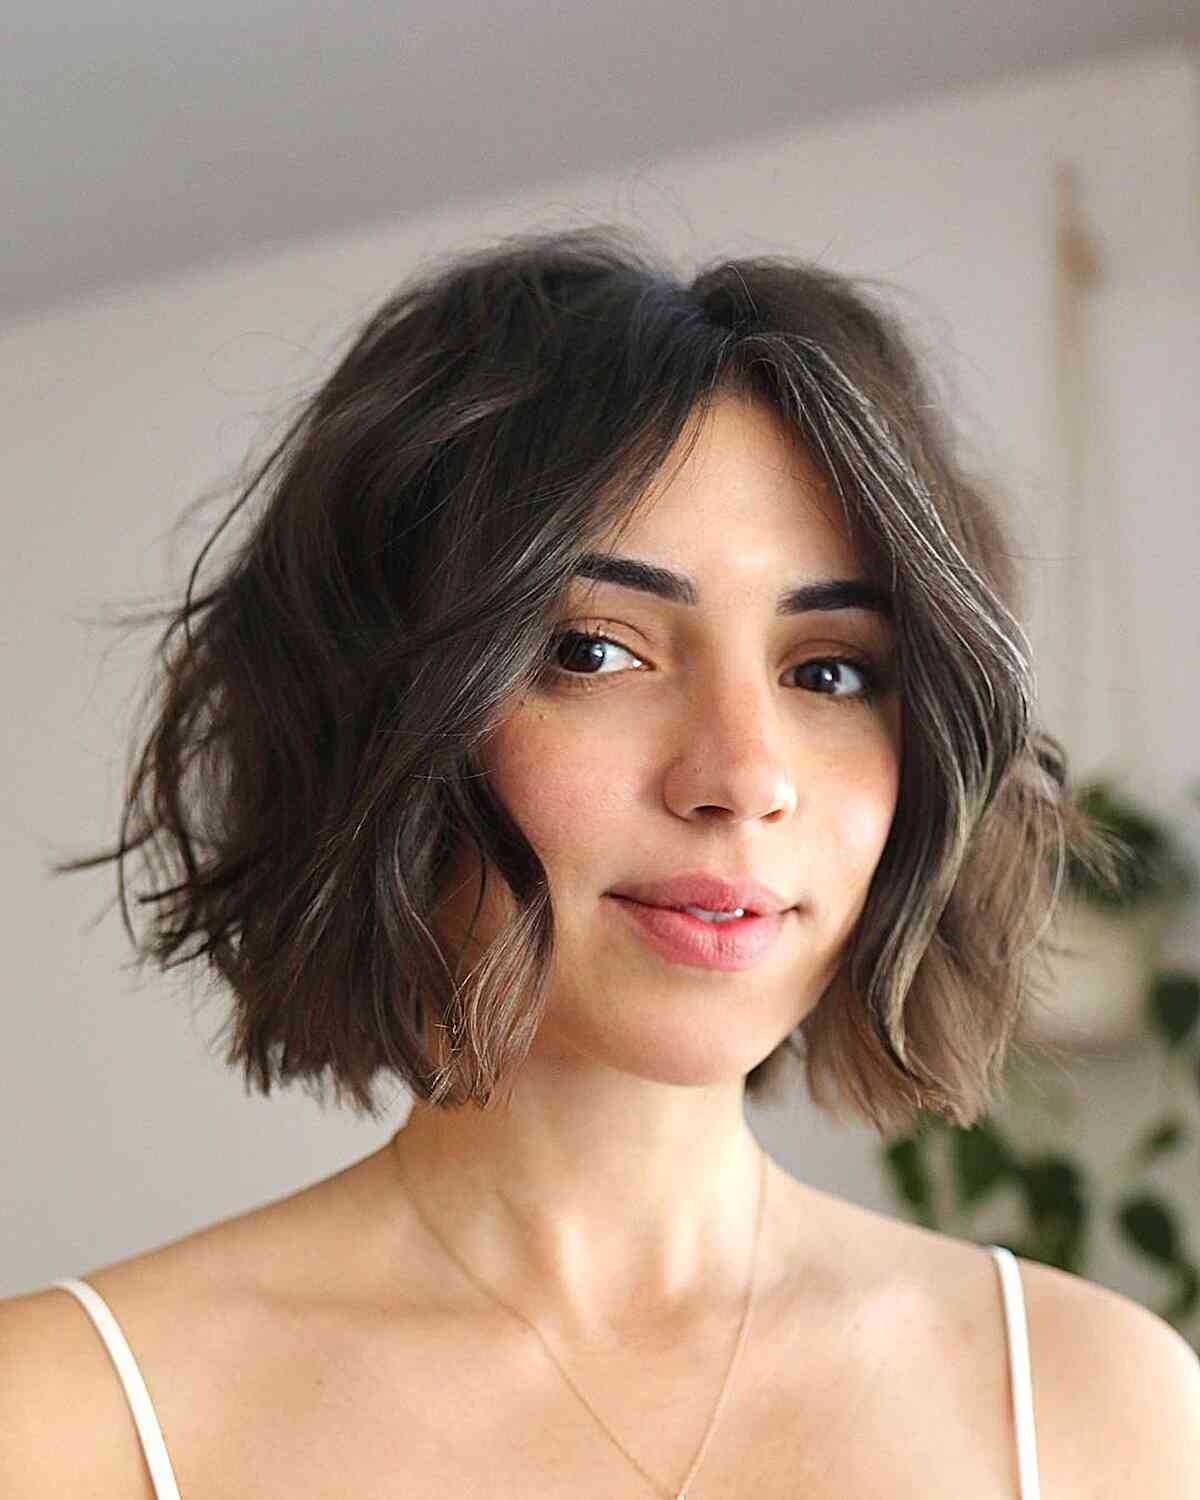 Textured and Messy Short Bob Hairstyle with a center part